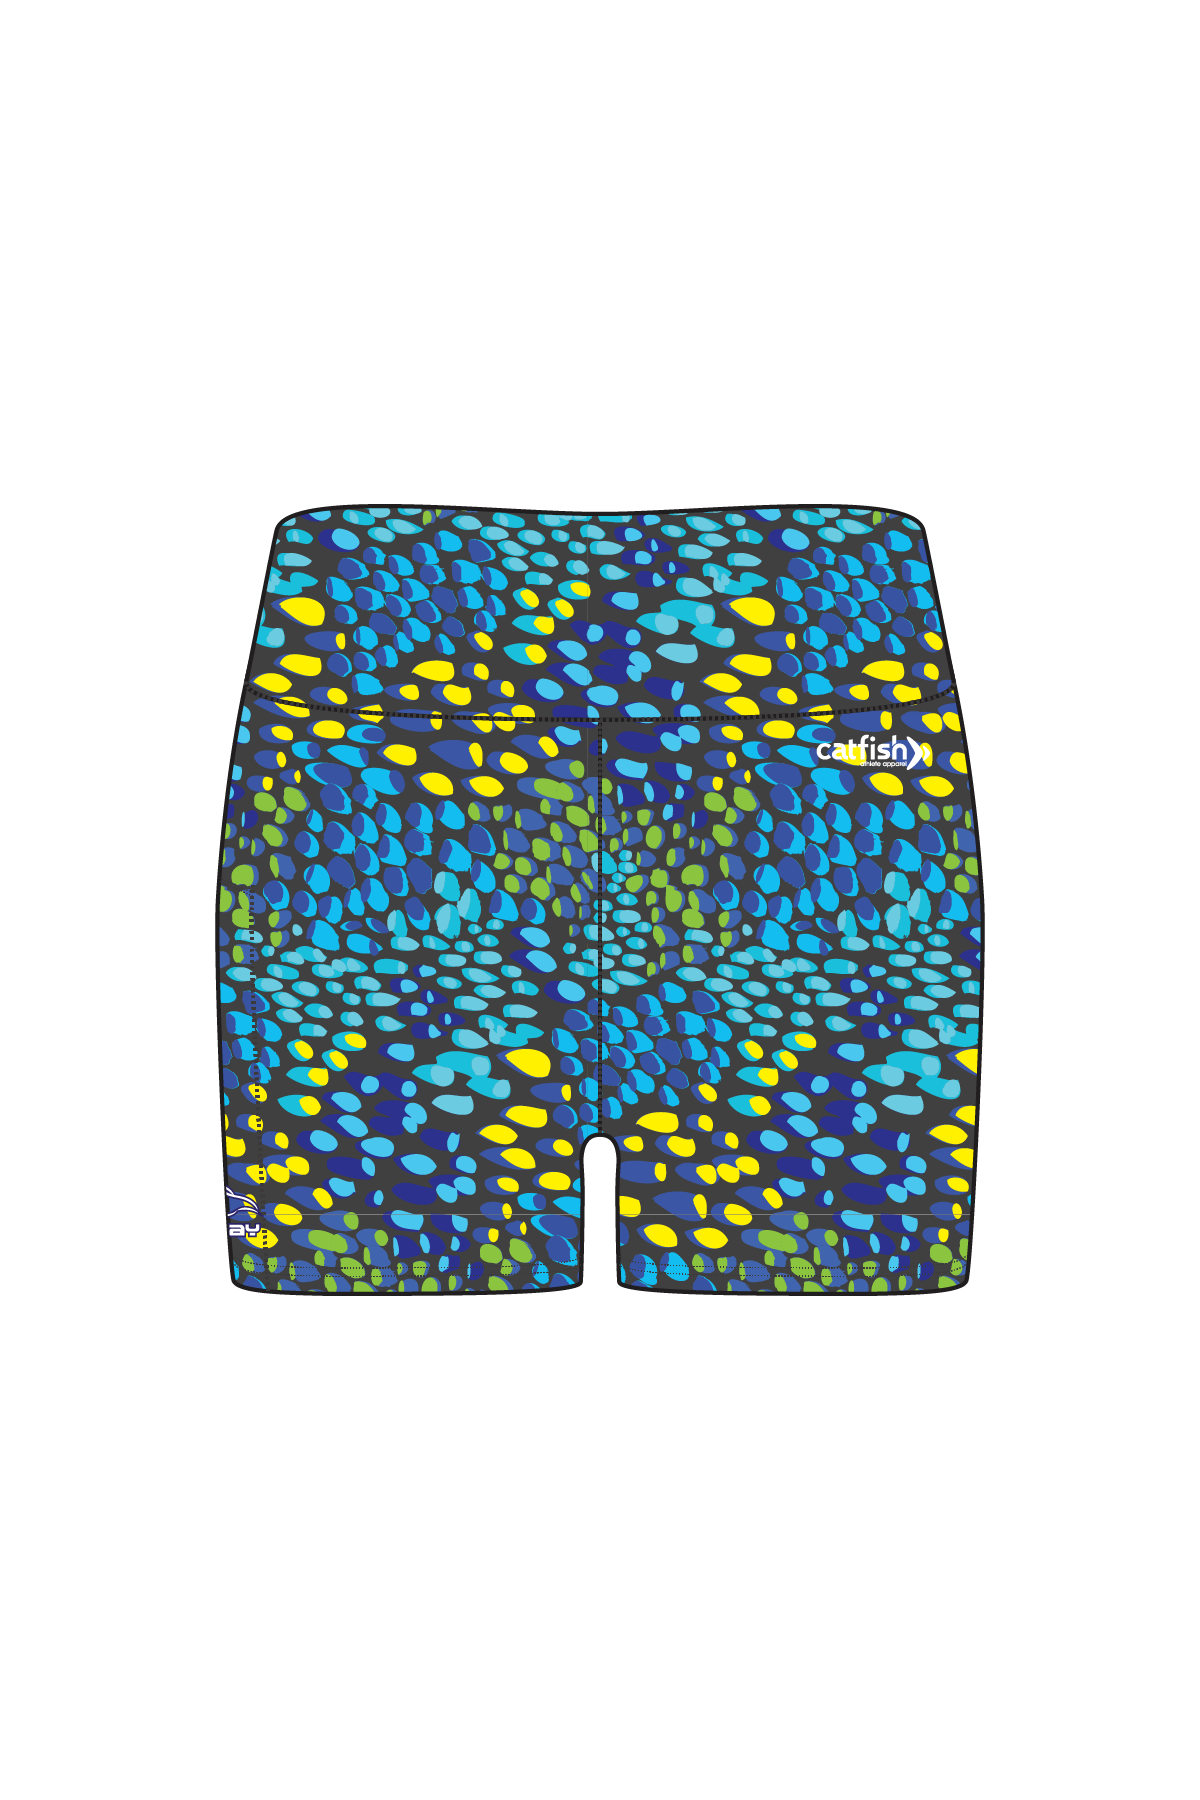 Women's Jervis Bay Mid Thigh Shorts